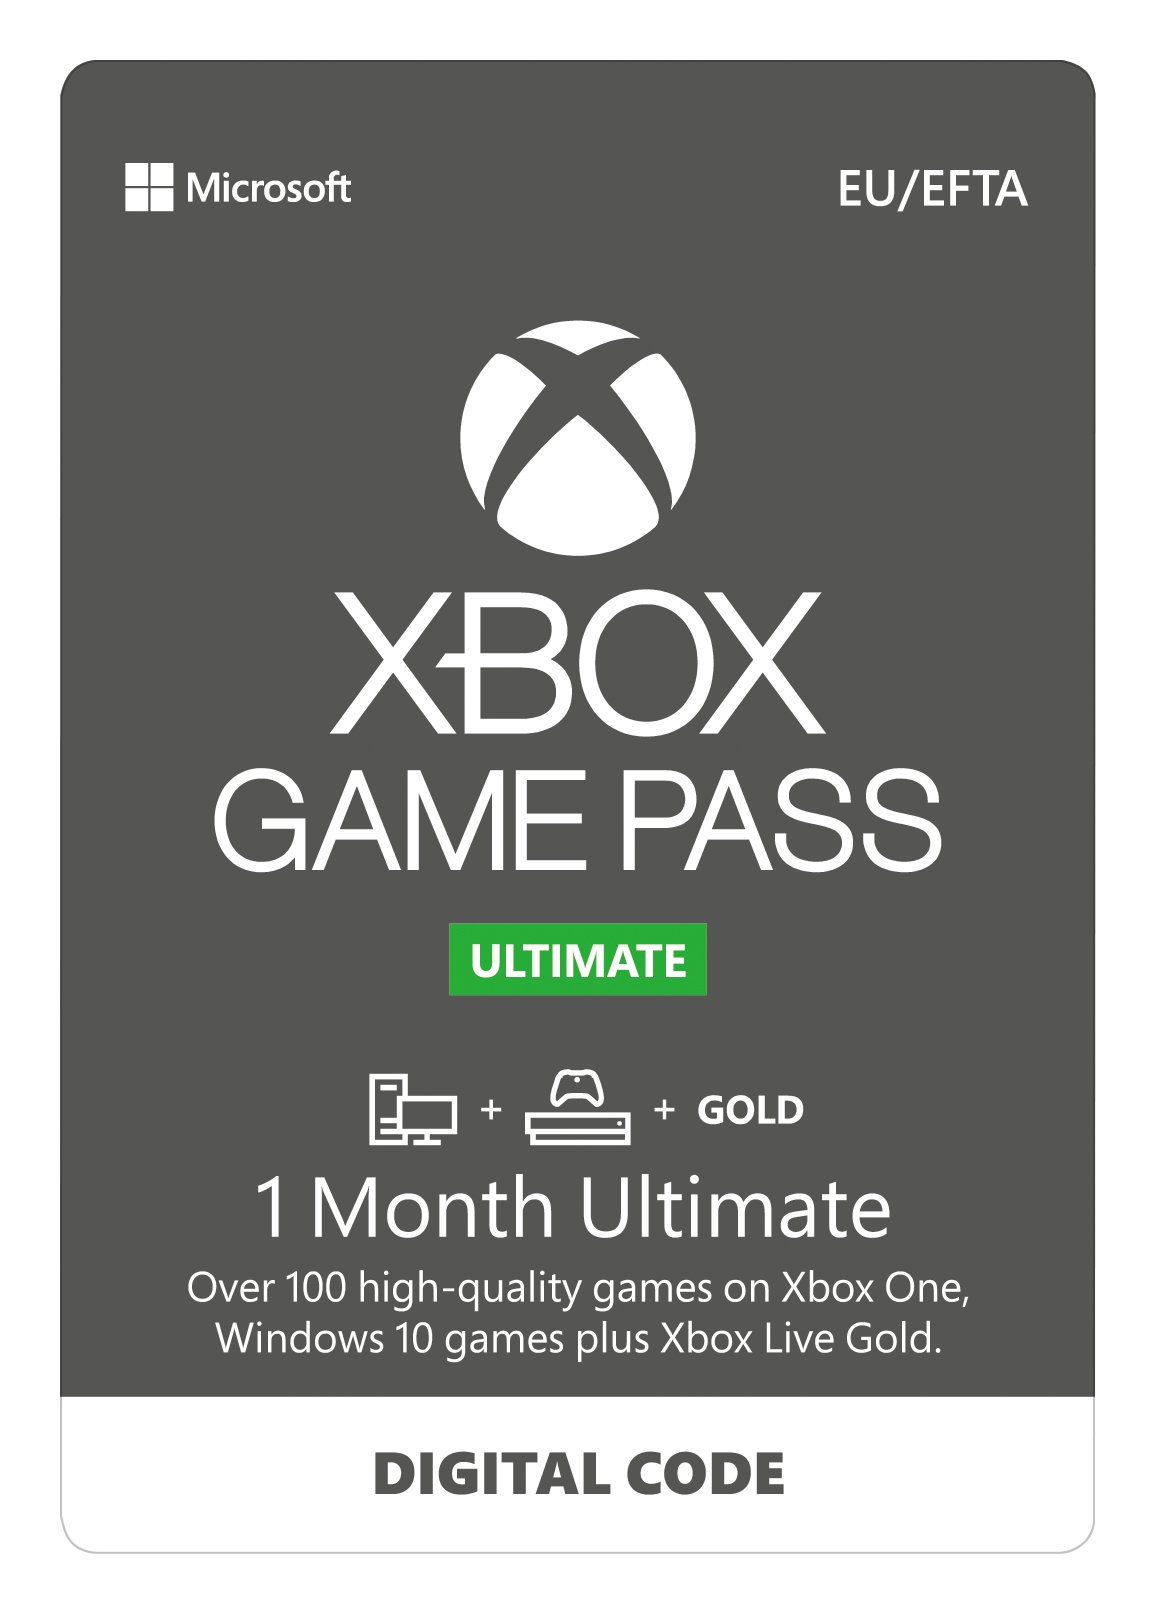 xbox game pass ultimate canada 12 month price